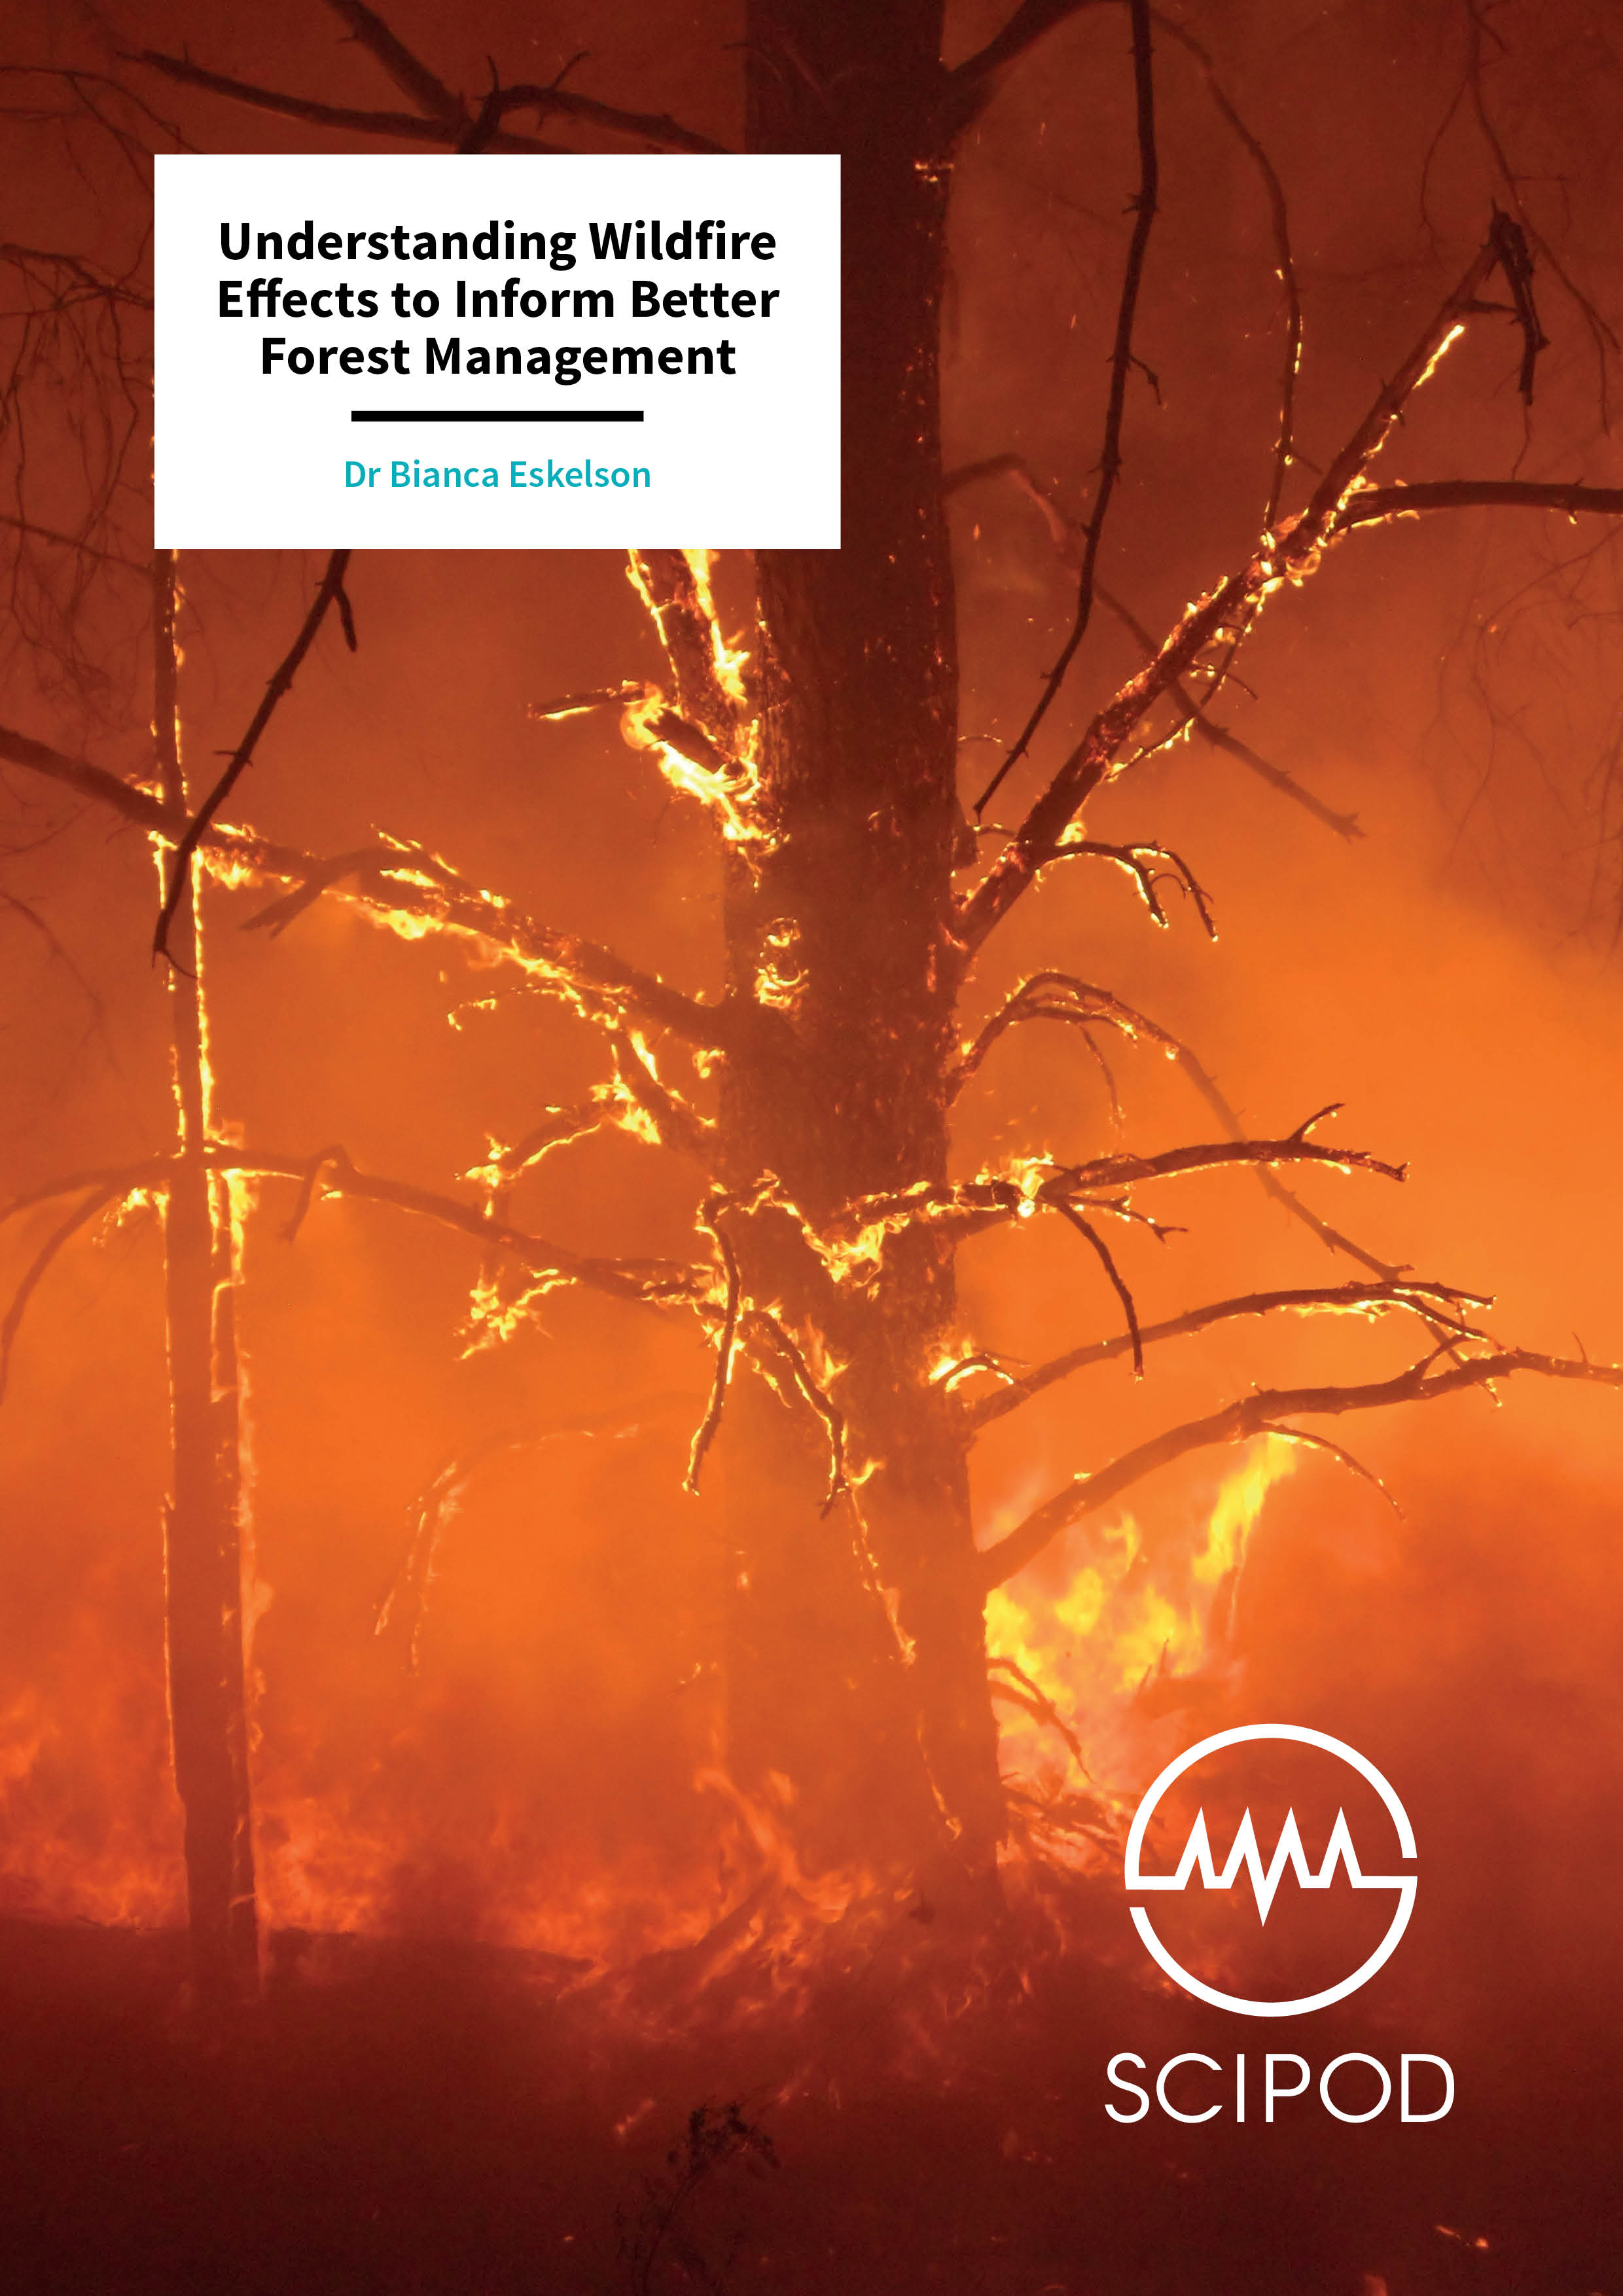 Understanding Wildfire Effects to Inform Better Forest Management – Dr Bianca Eskelson, University of British Columbia